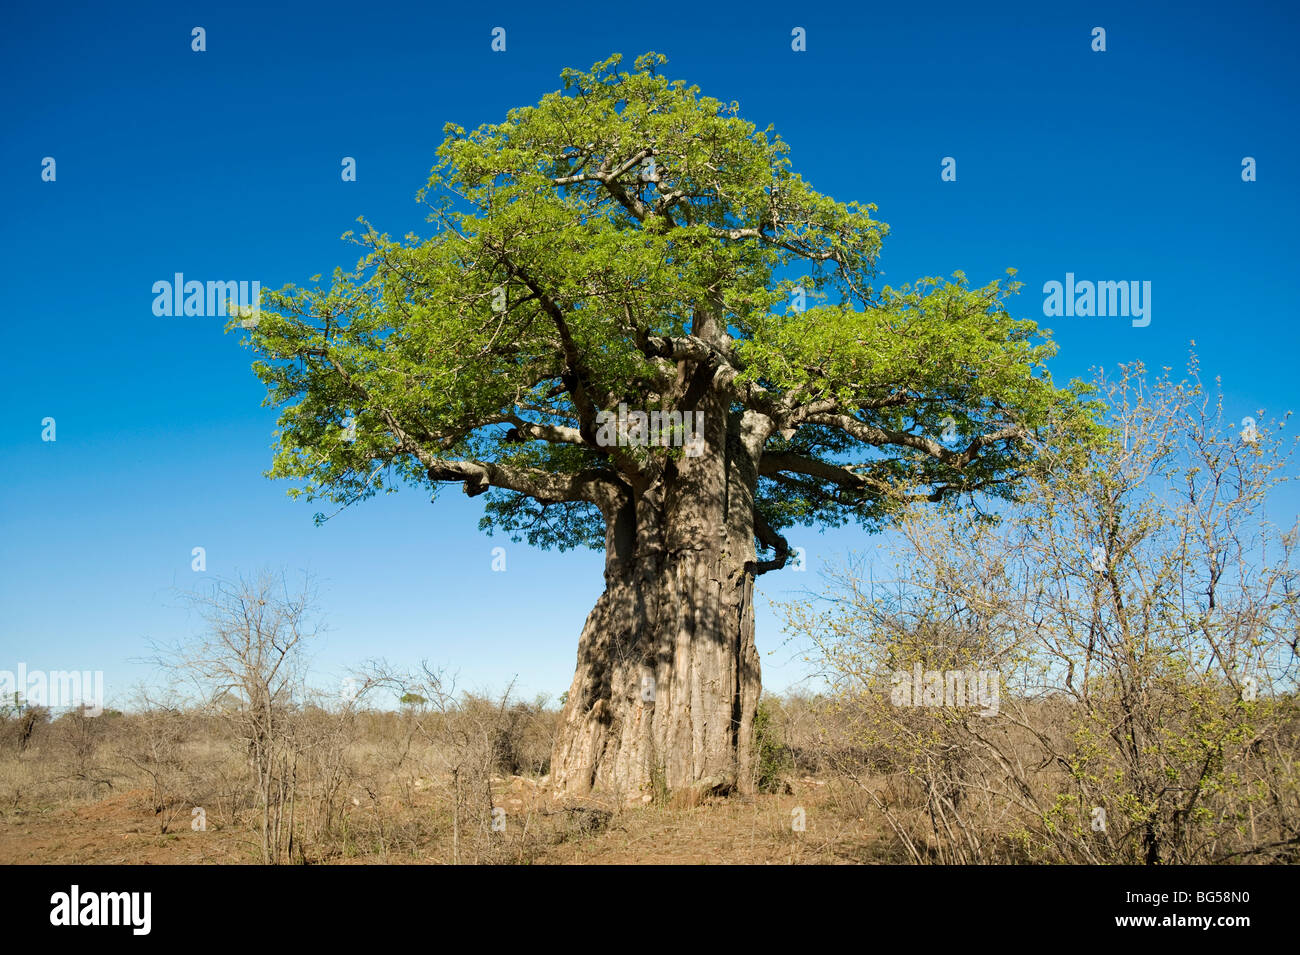 Boabab Tree. Kruger National Park. South Africa.  A giant baobab tree in the African bush Stock Photo